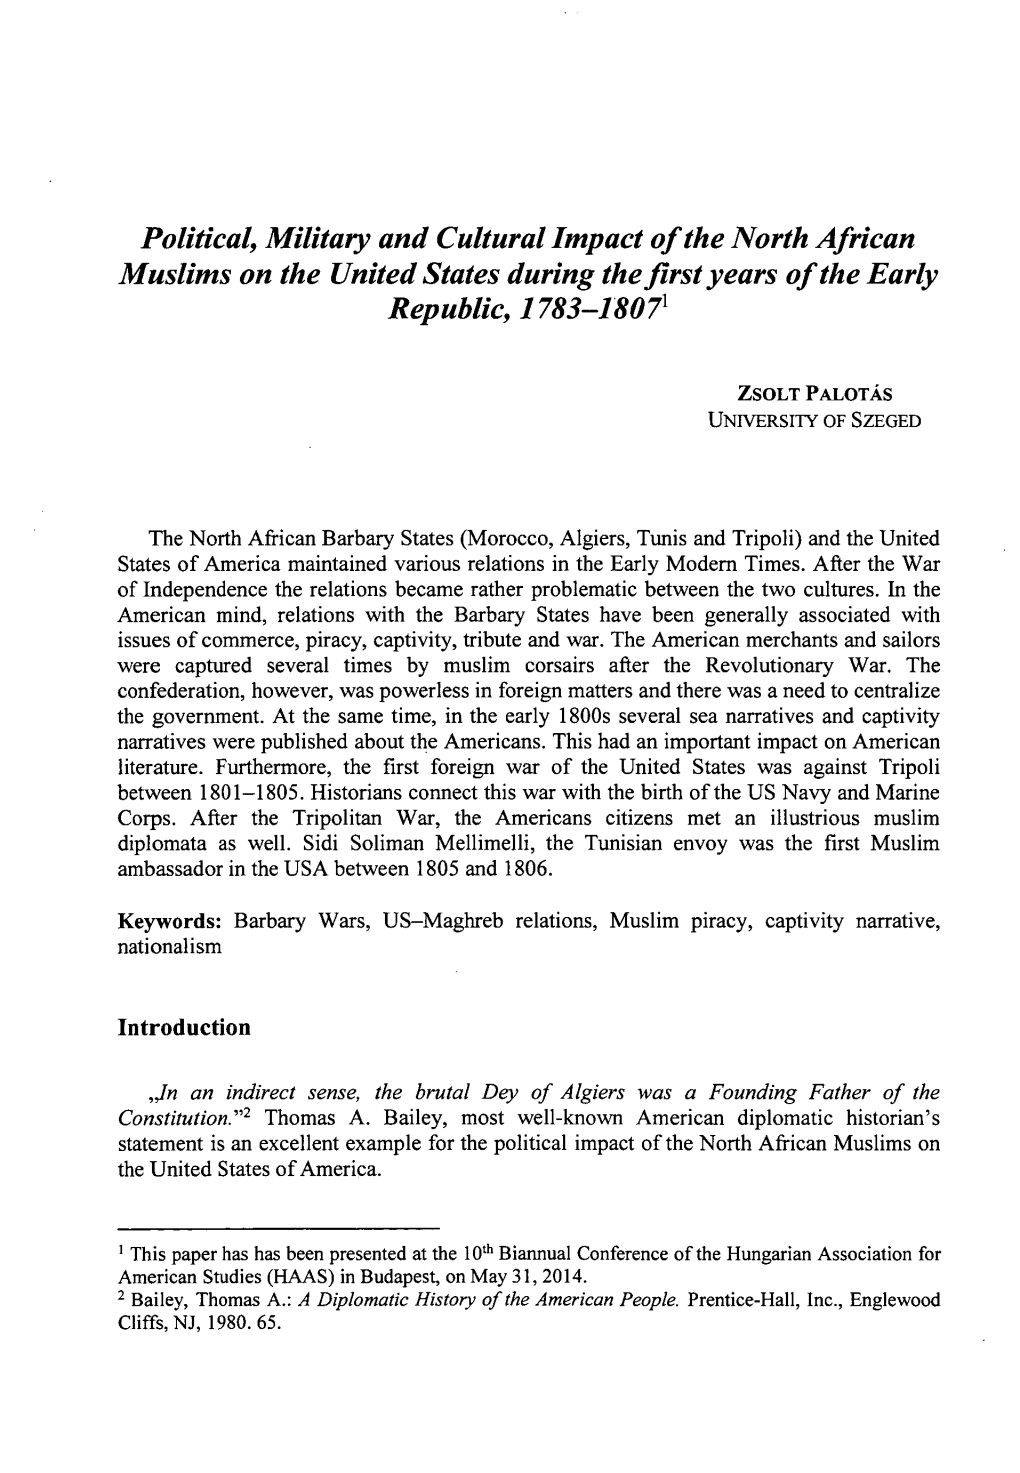 Political, Military and Cultural Impact of the North African Muslims on the United States During the First Years of the Early Republic, 1783-18071